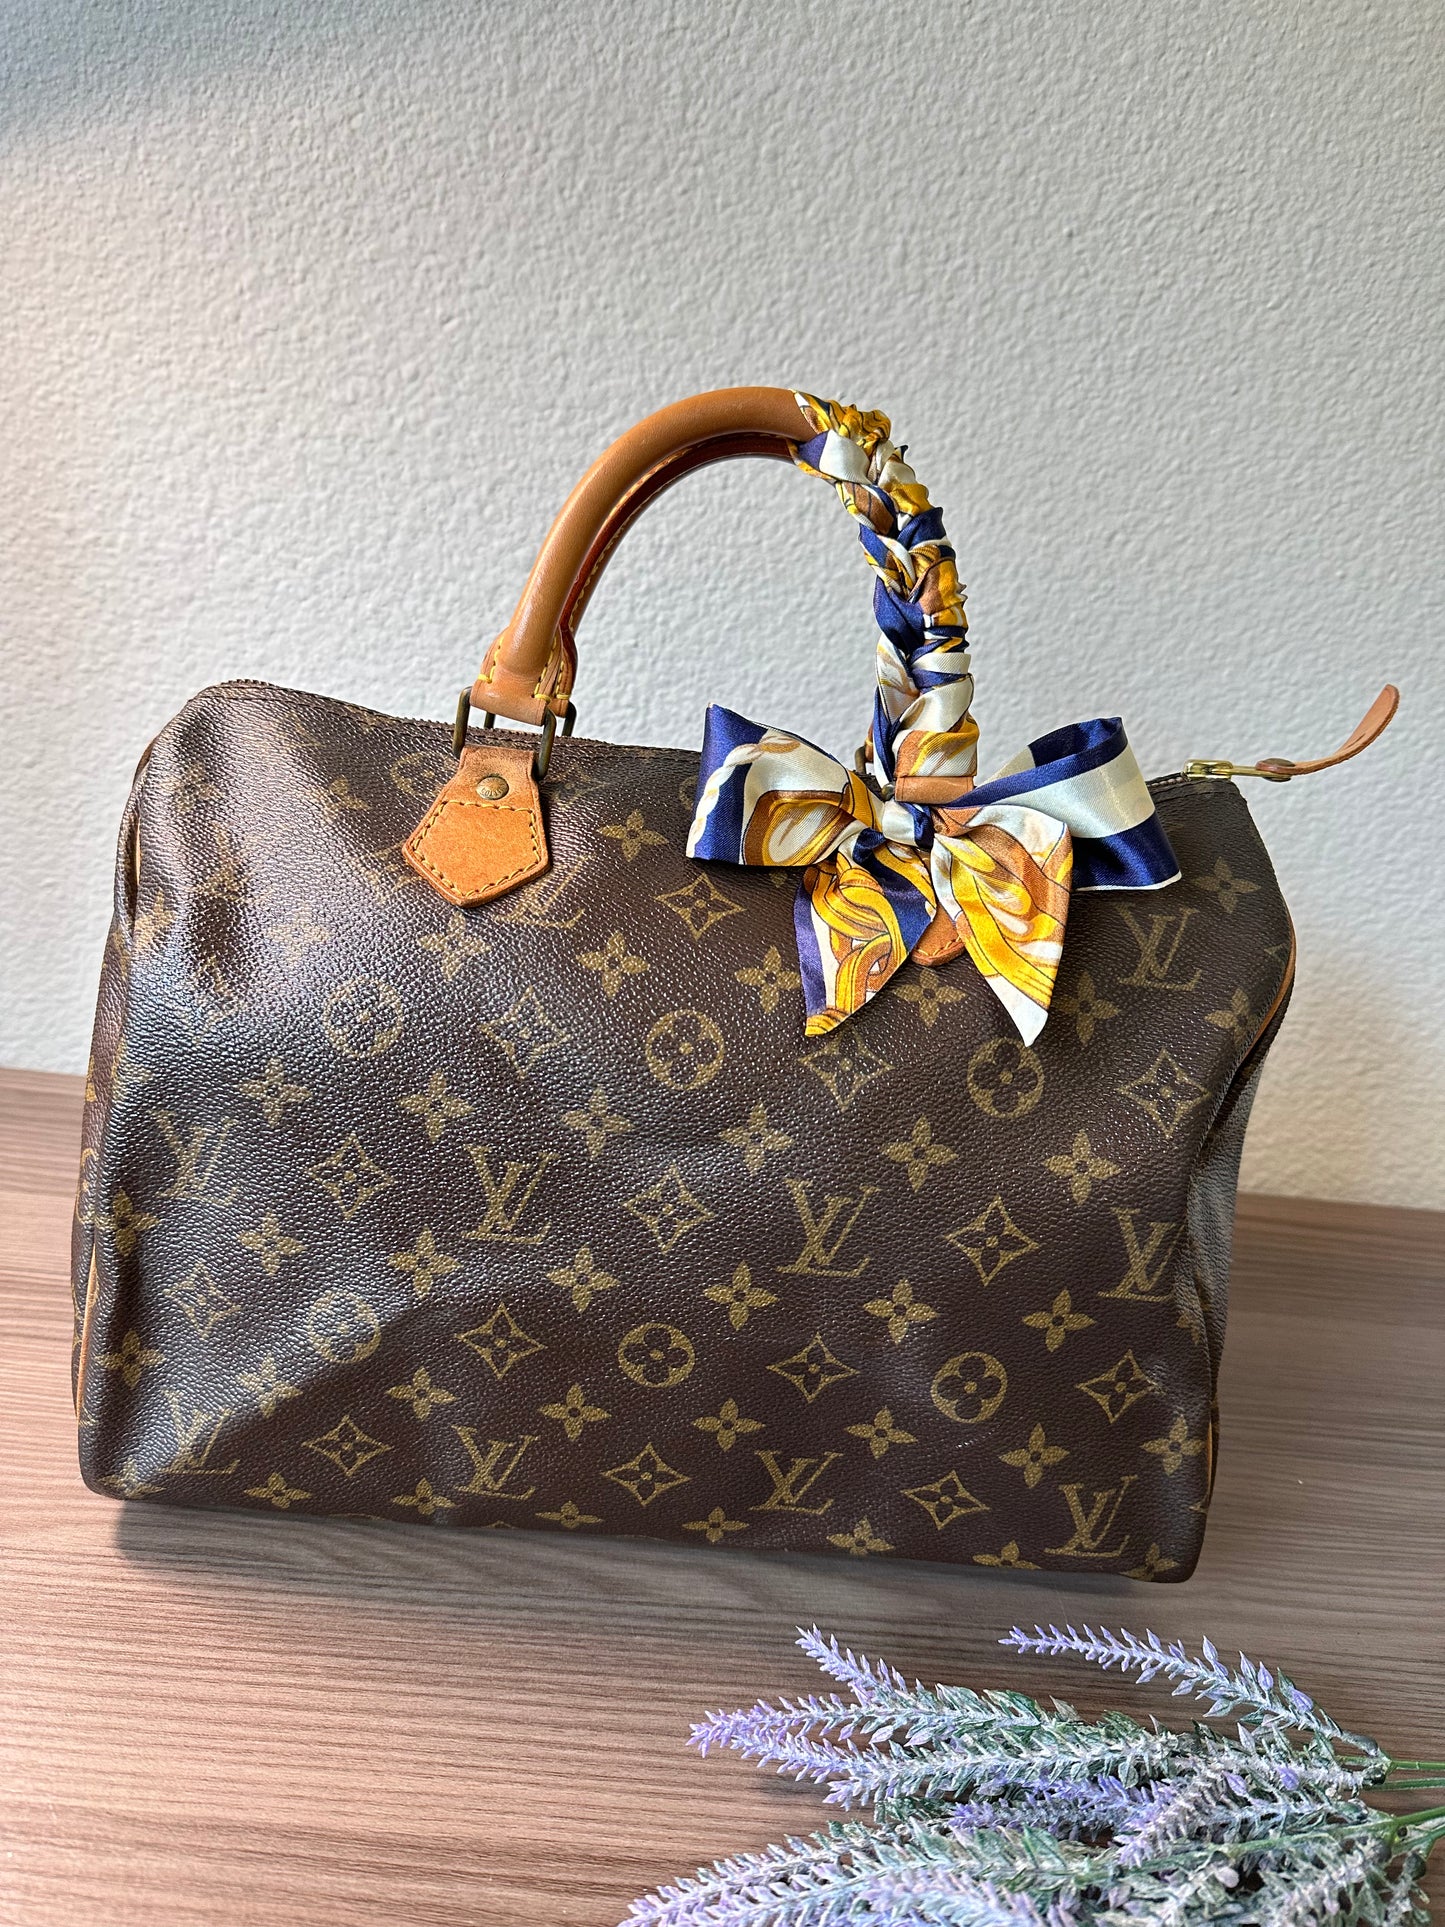 Authentic Louis Vuitton Speedy 30 Pre Owned